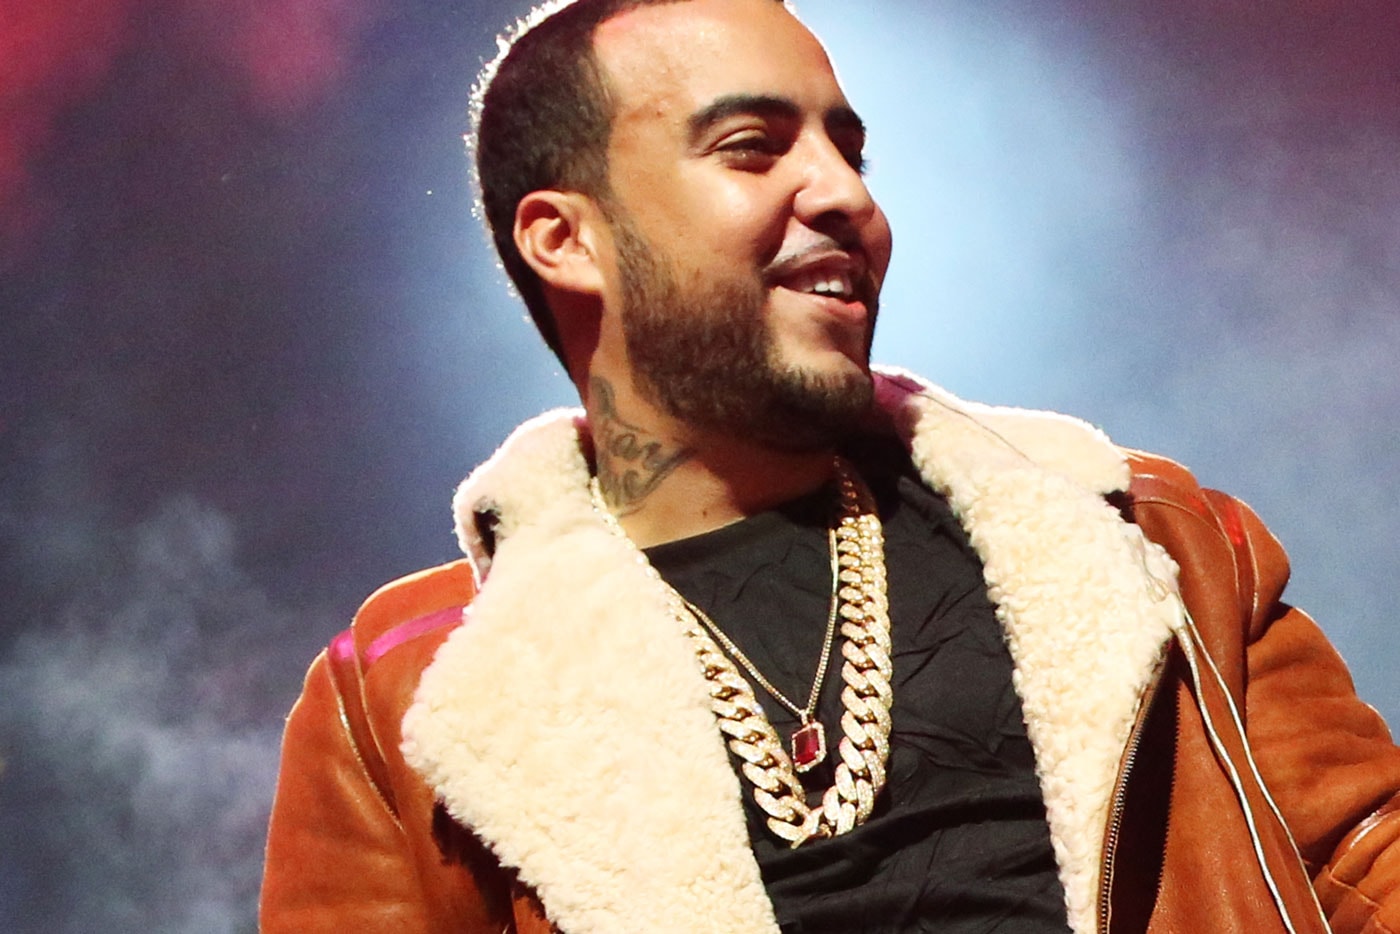 French Montana and Fetty Wap Team Up on "Freaky"